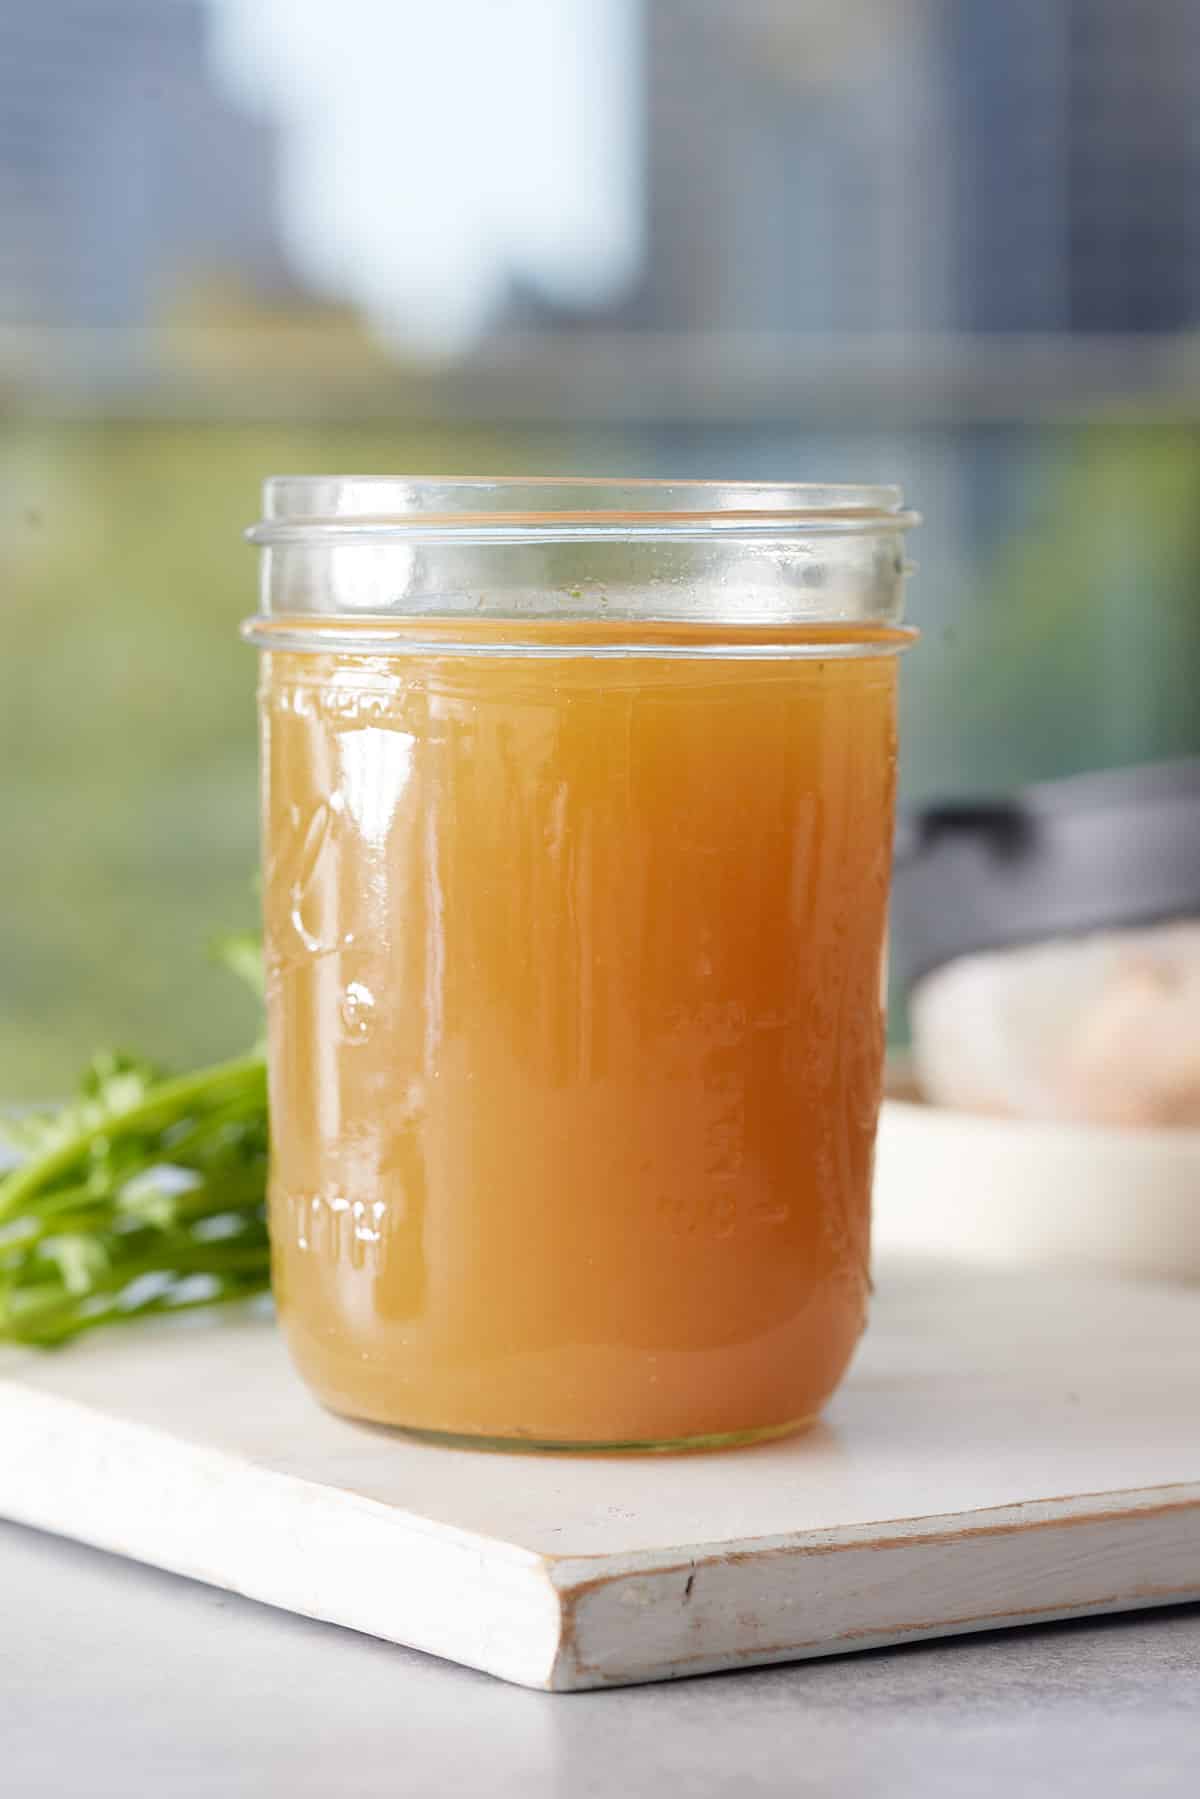 Jar of shrimp stock set on a wooden board to cool